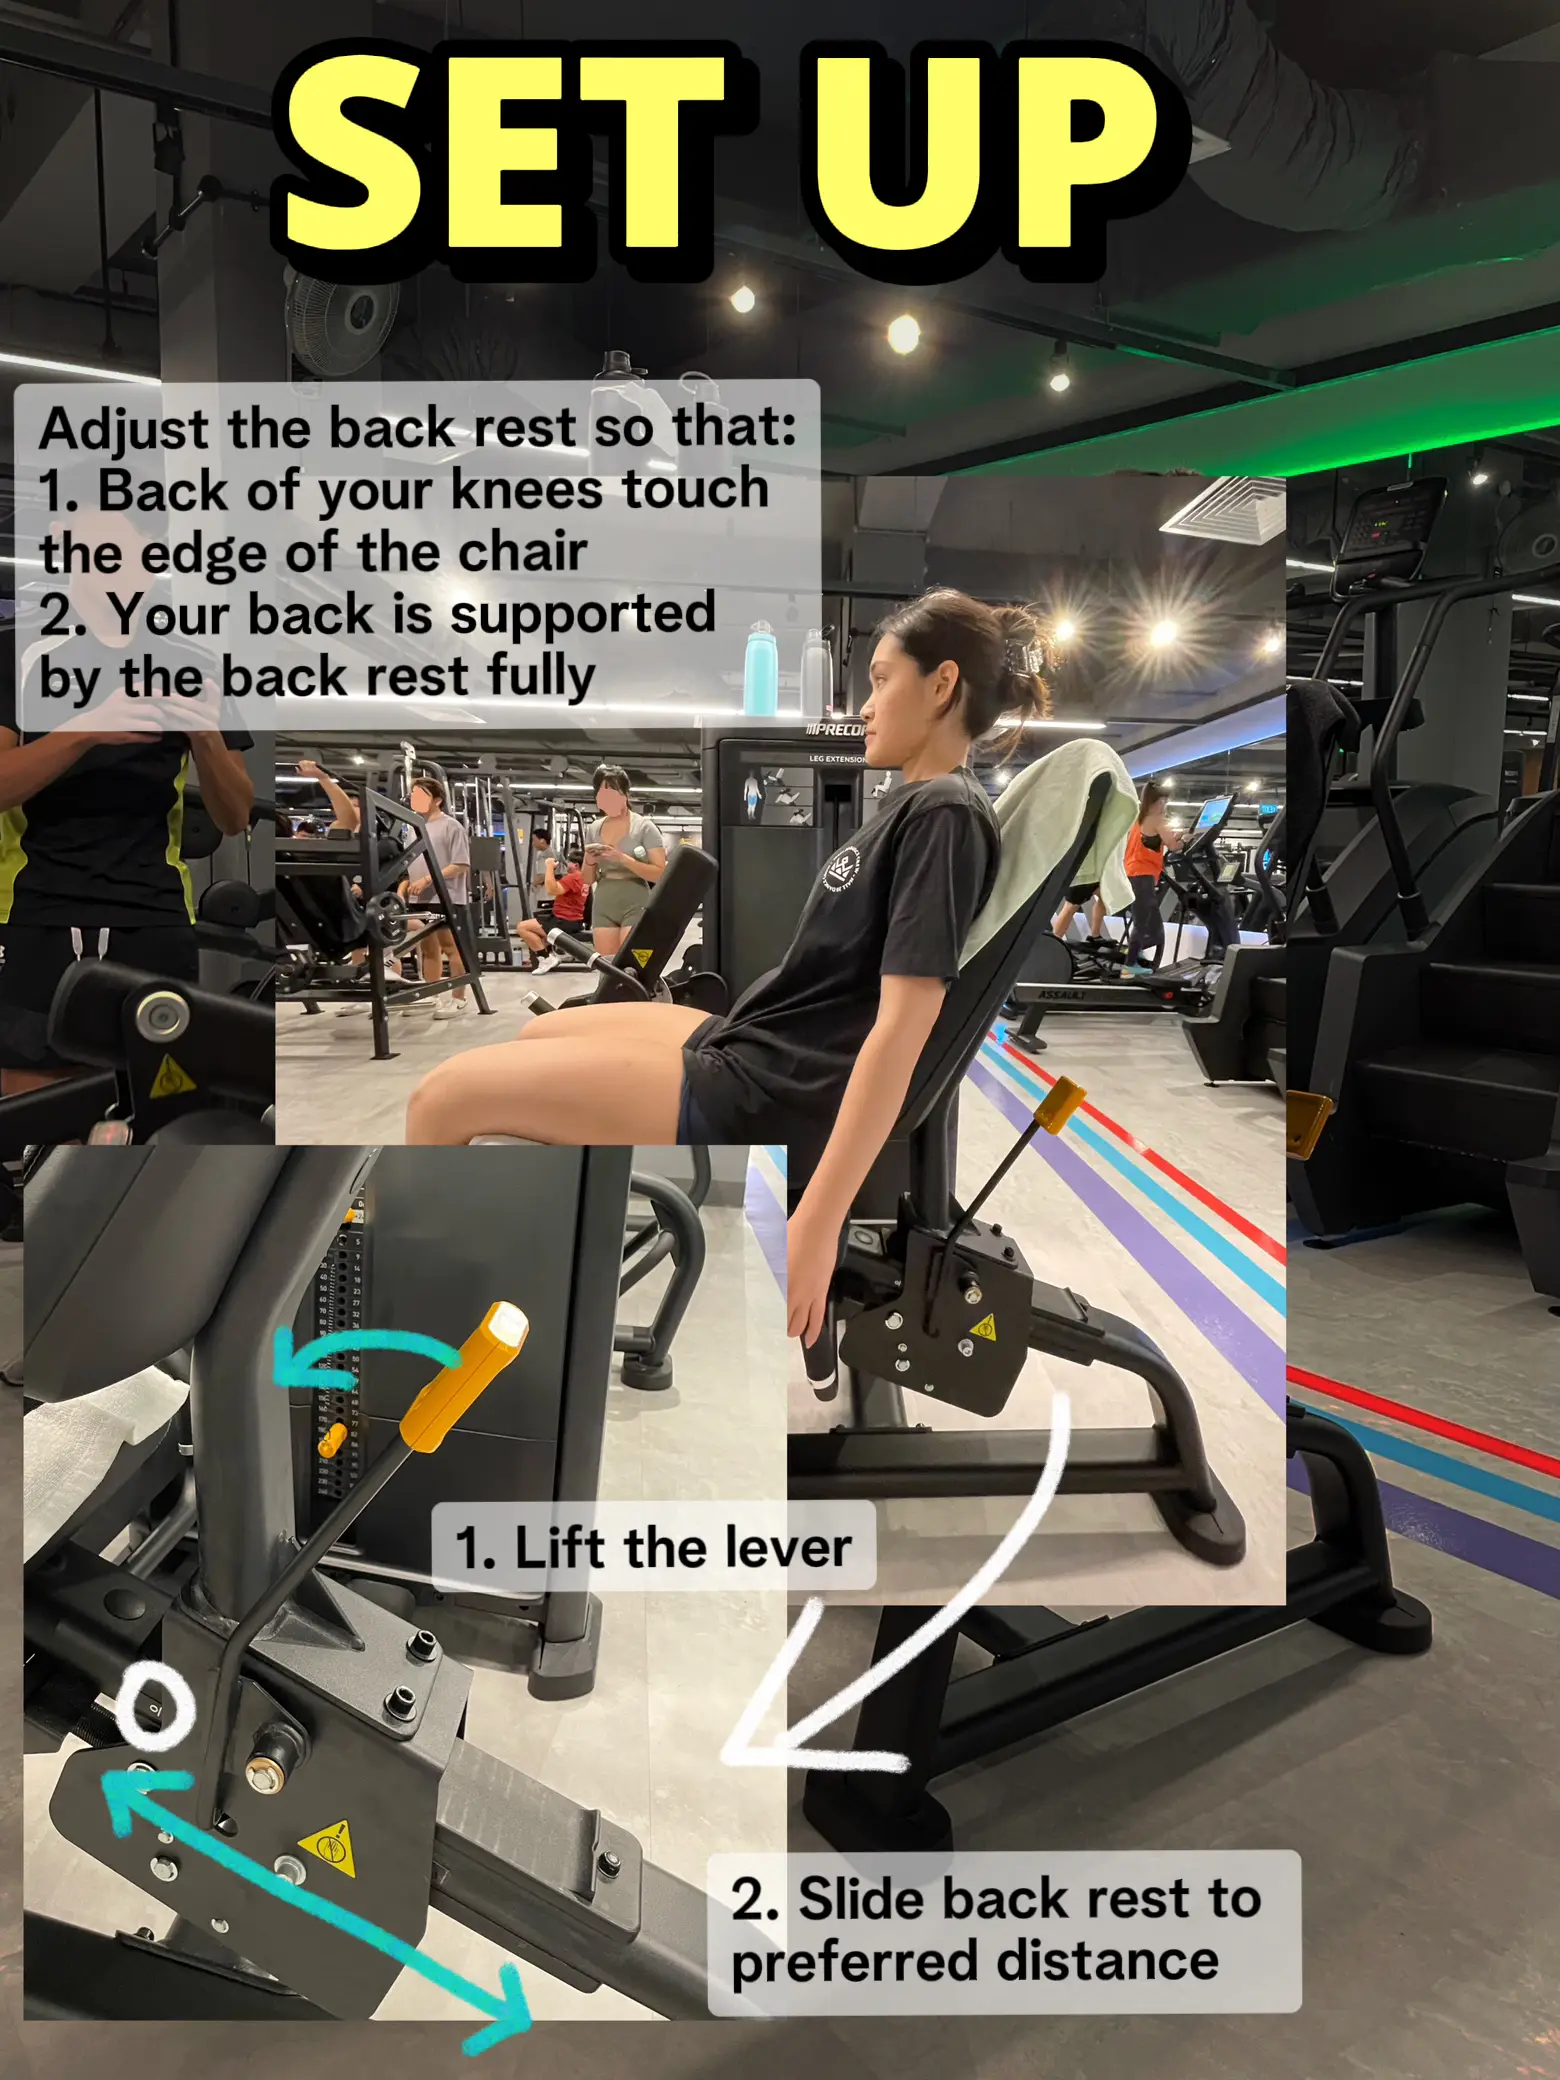 The Ultimate Guide to the LEG PRESS MACHINE 💪🏻, Gallery posted by Chloe  🦋